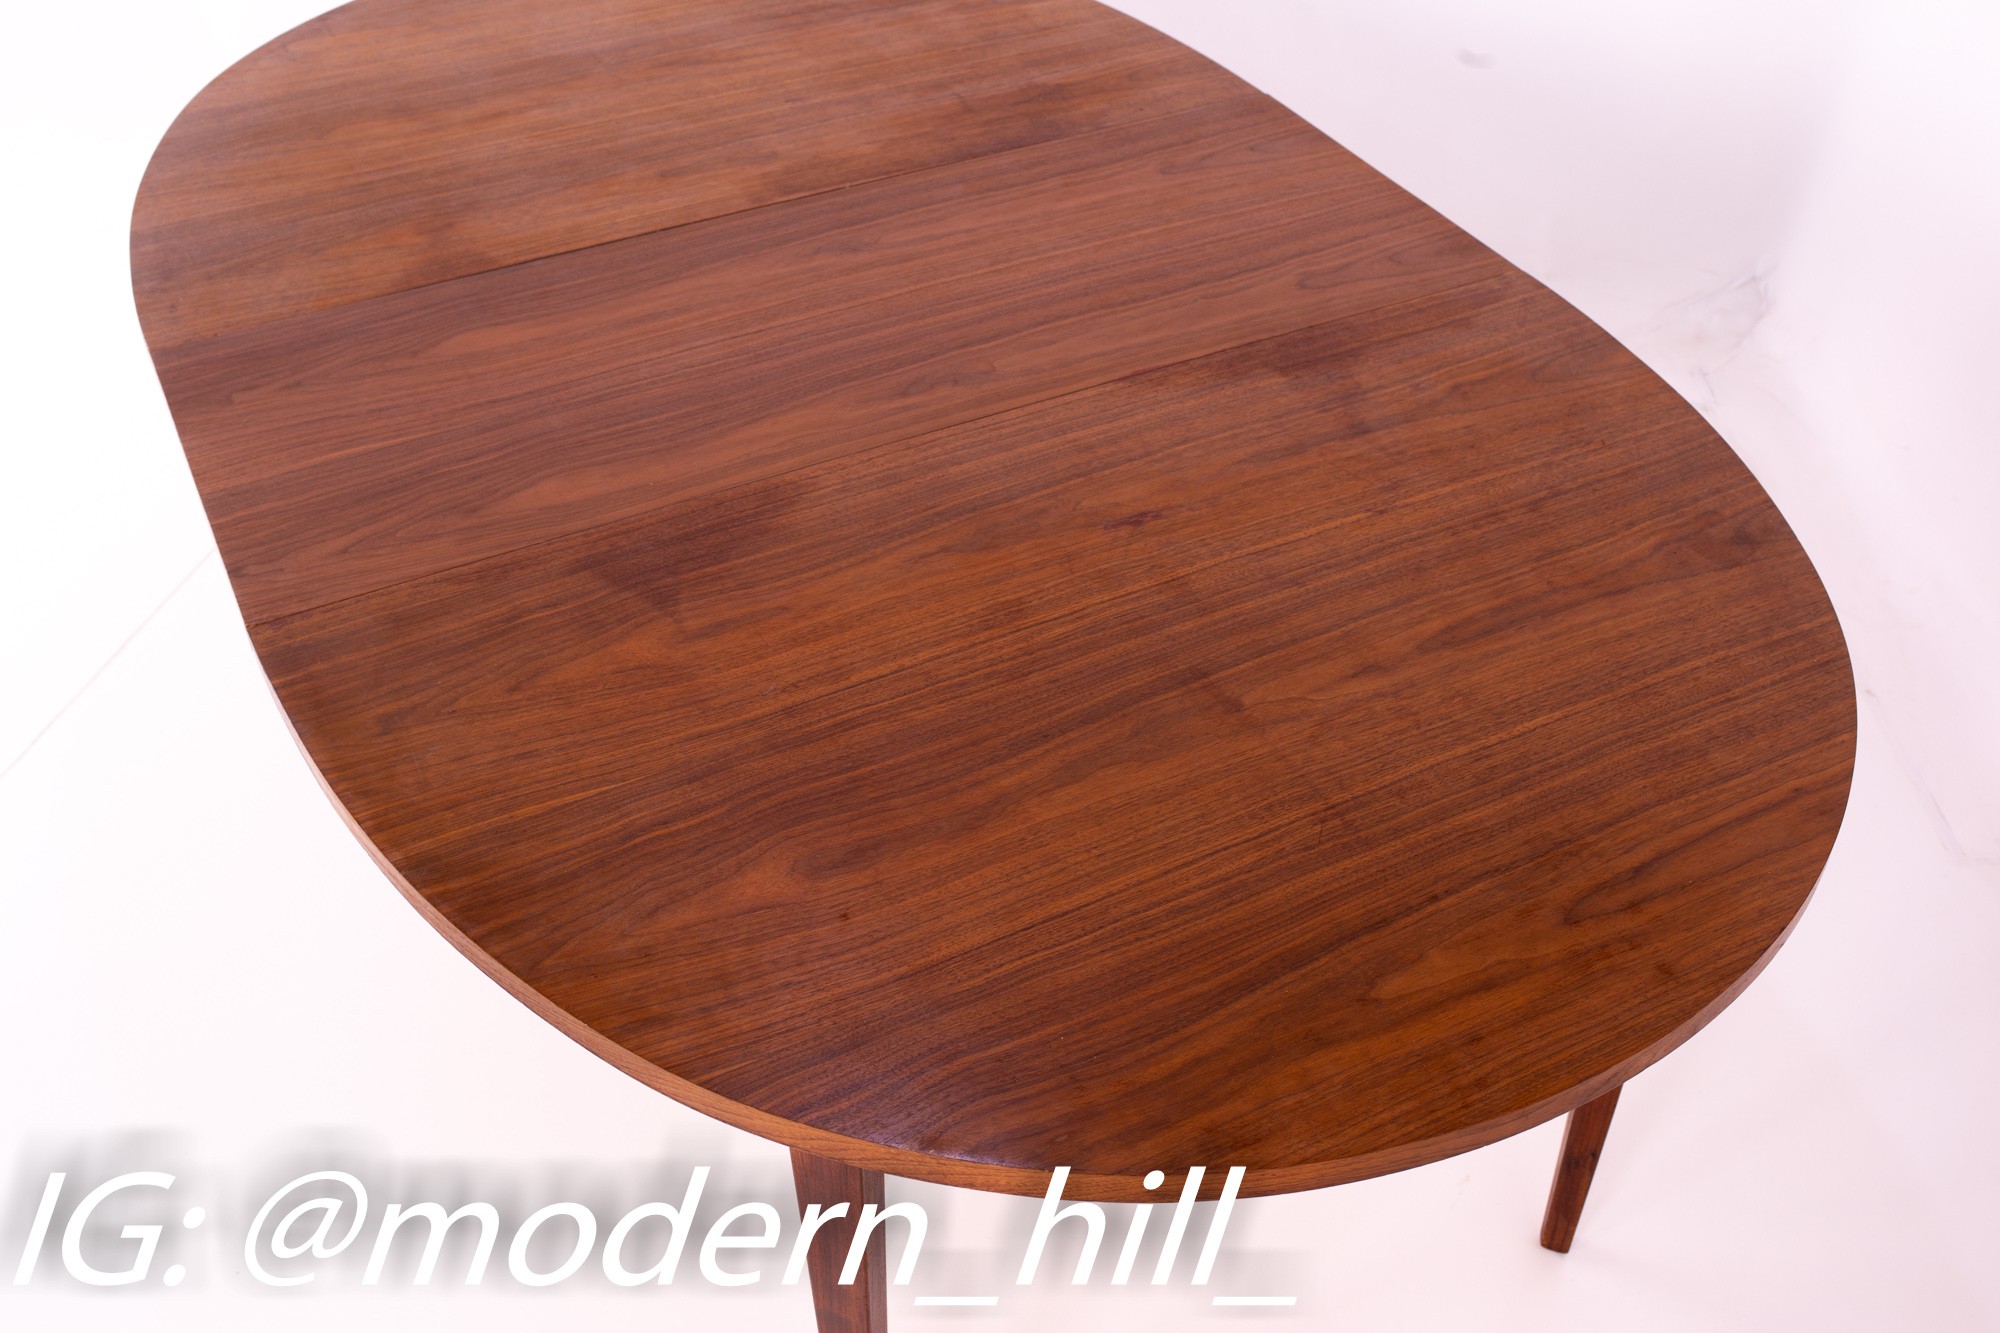 Dillingham Mid Century Round Expanding Walnut Dining Table with 2 Leaves